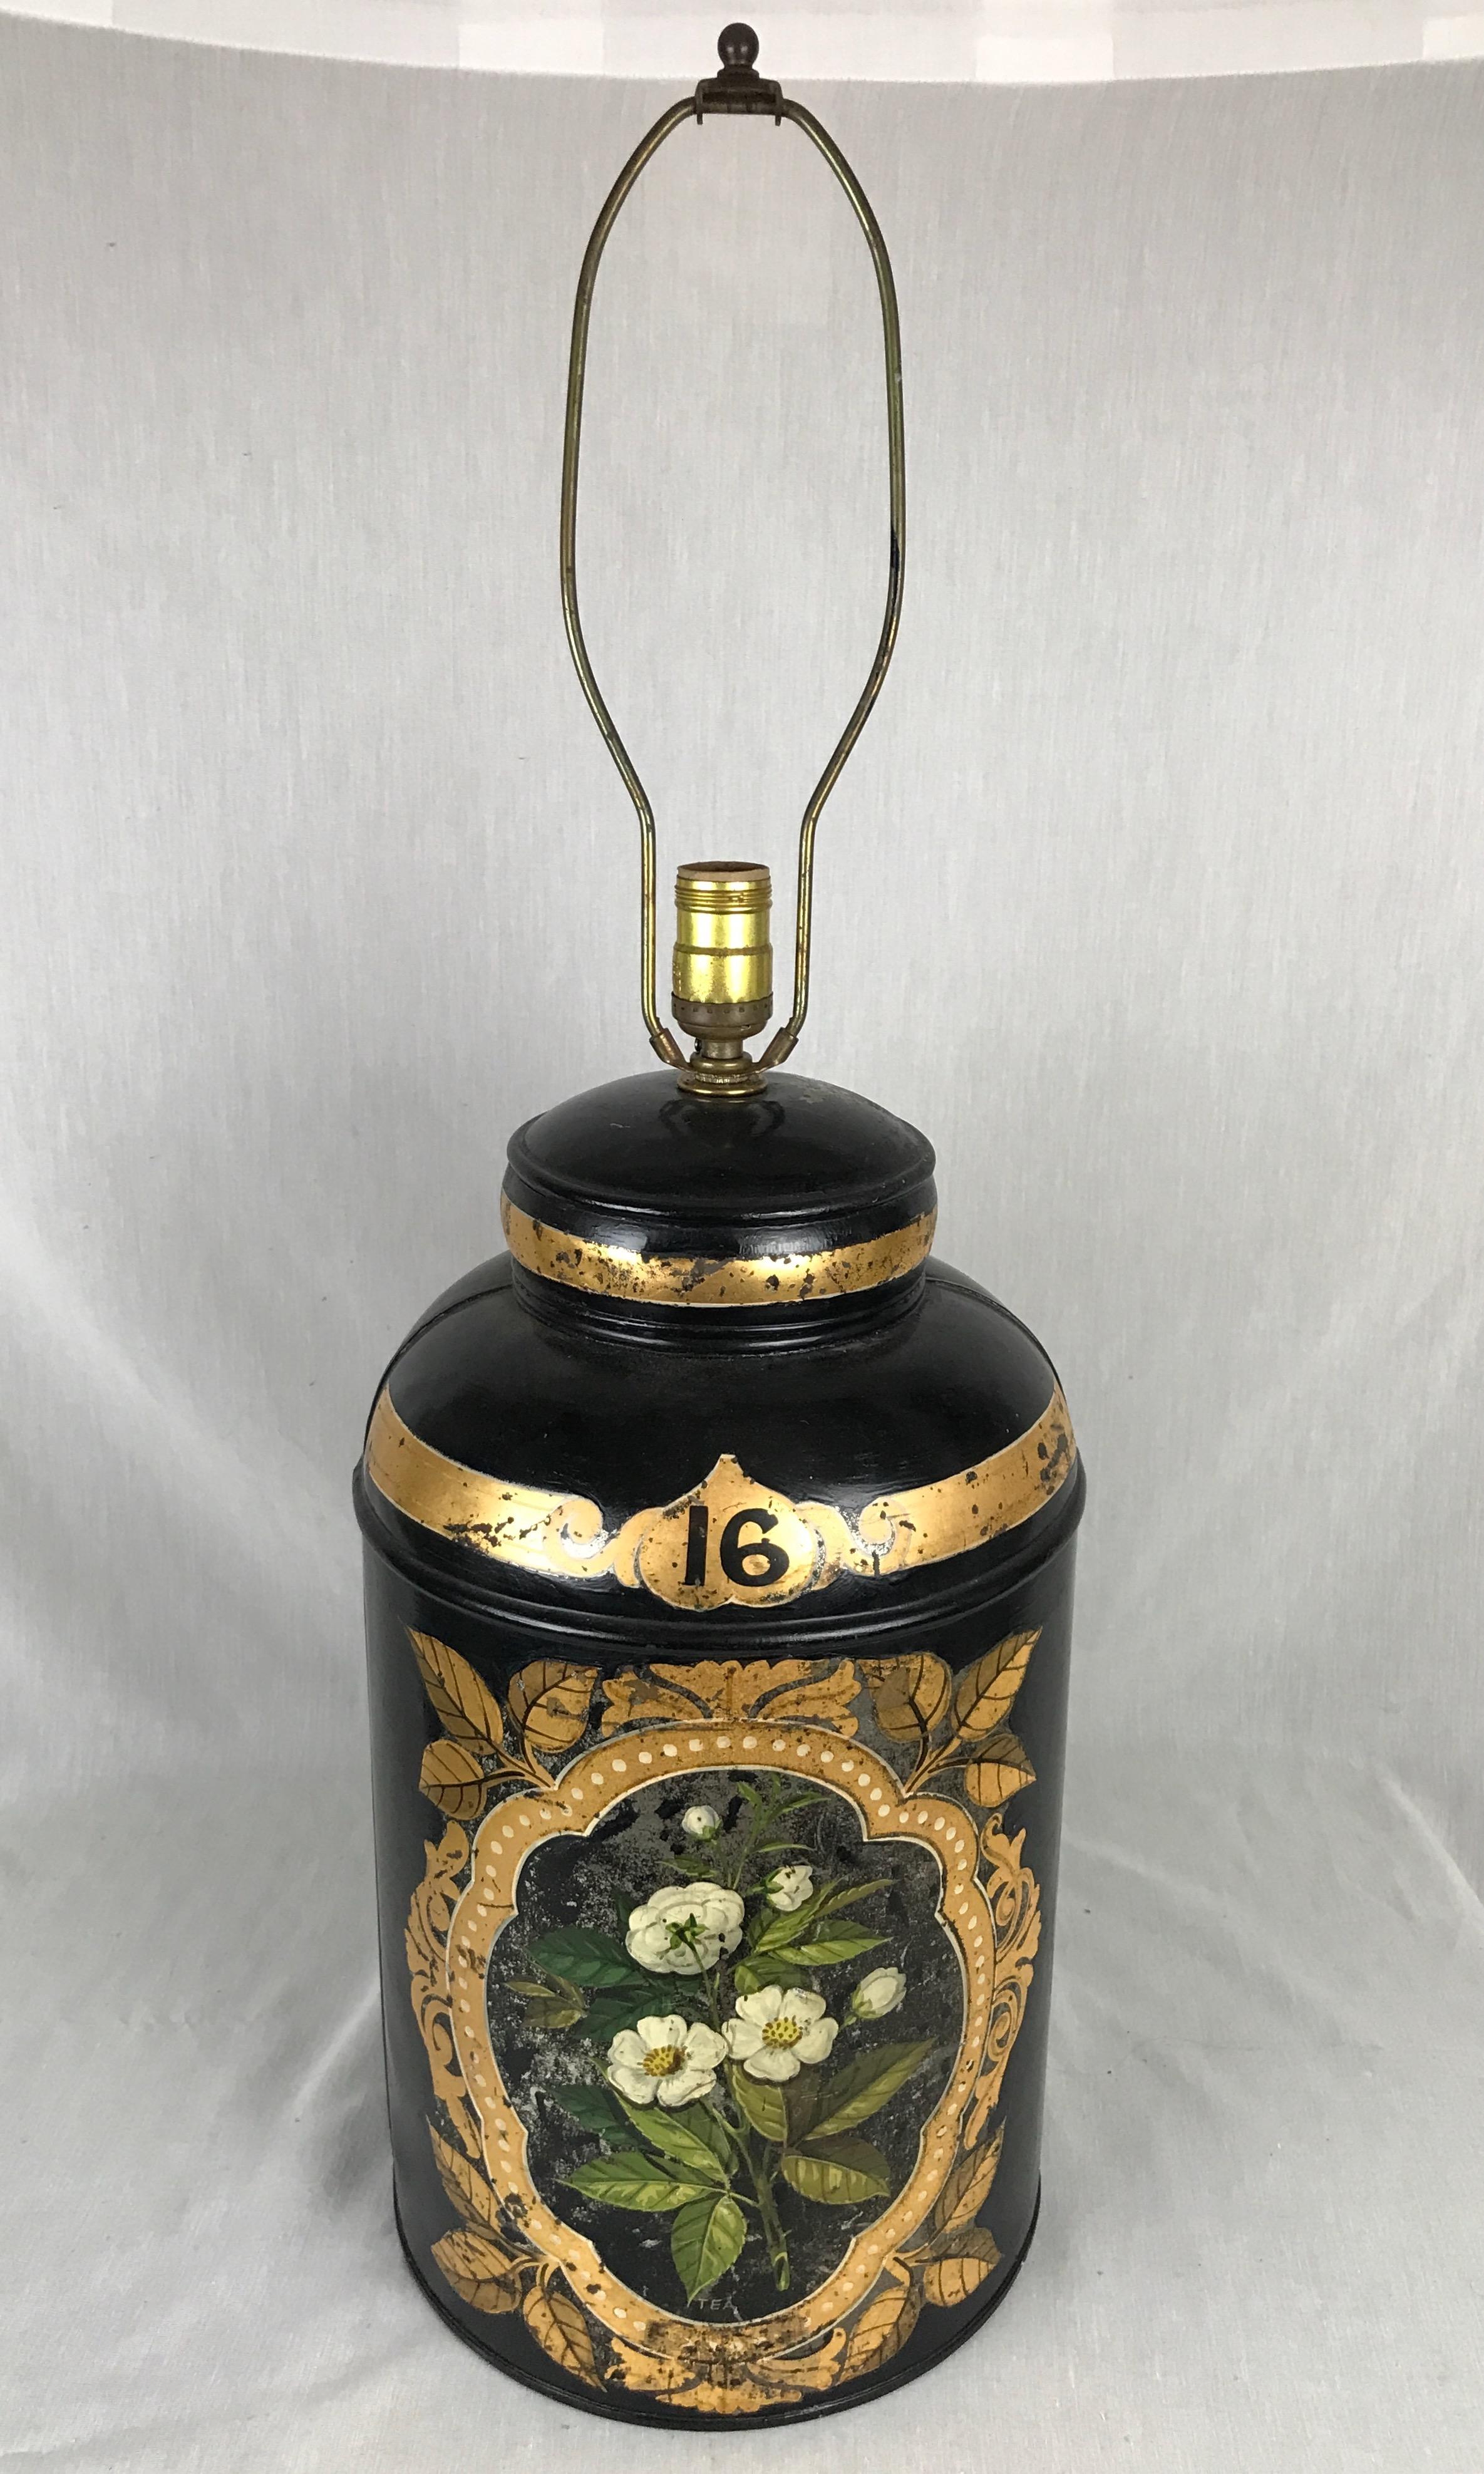 Antique tole painted and gilt tea canister converted to a lamp. Has original label on the back Parnall & Sons, Ltd. 